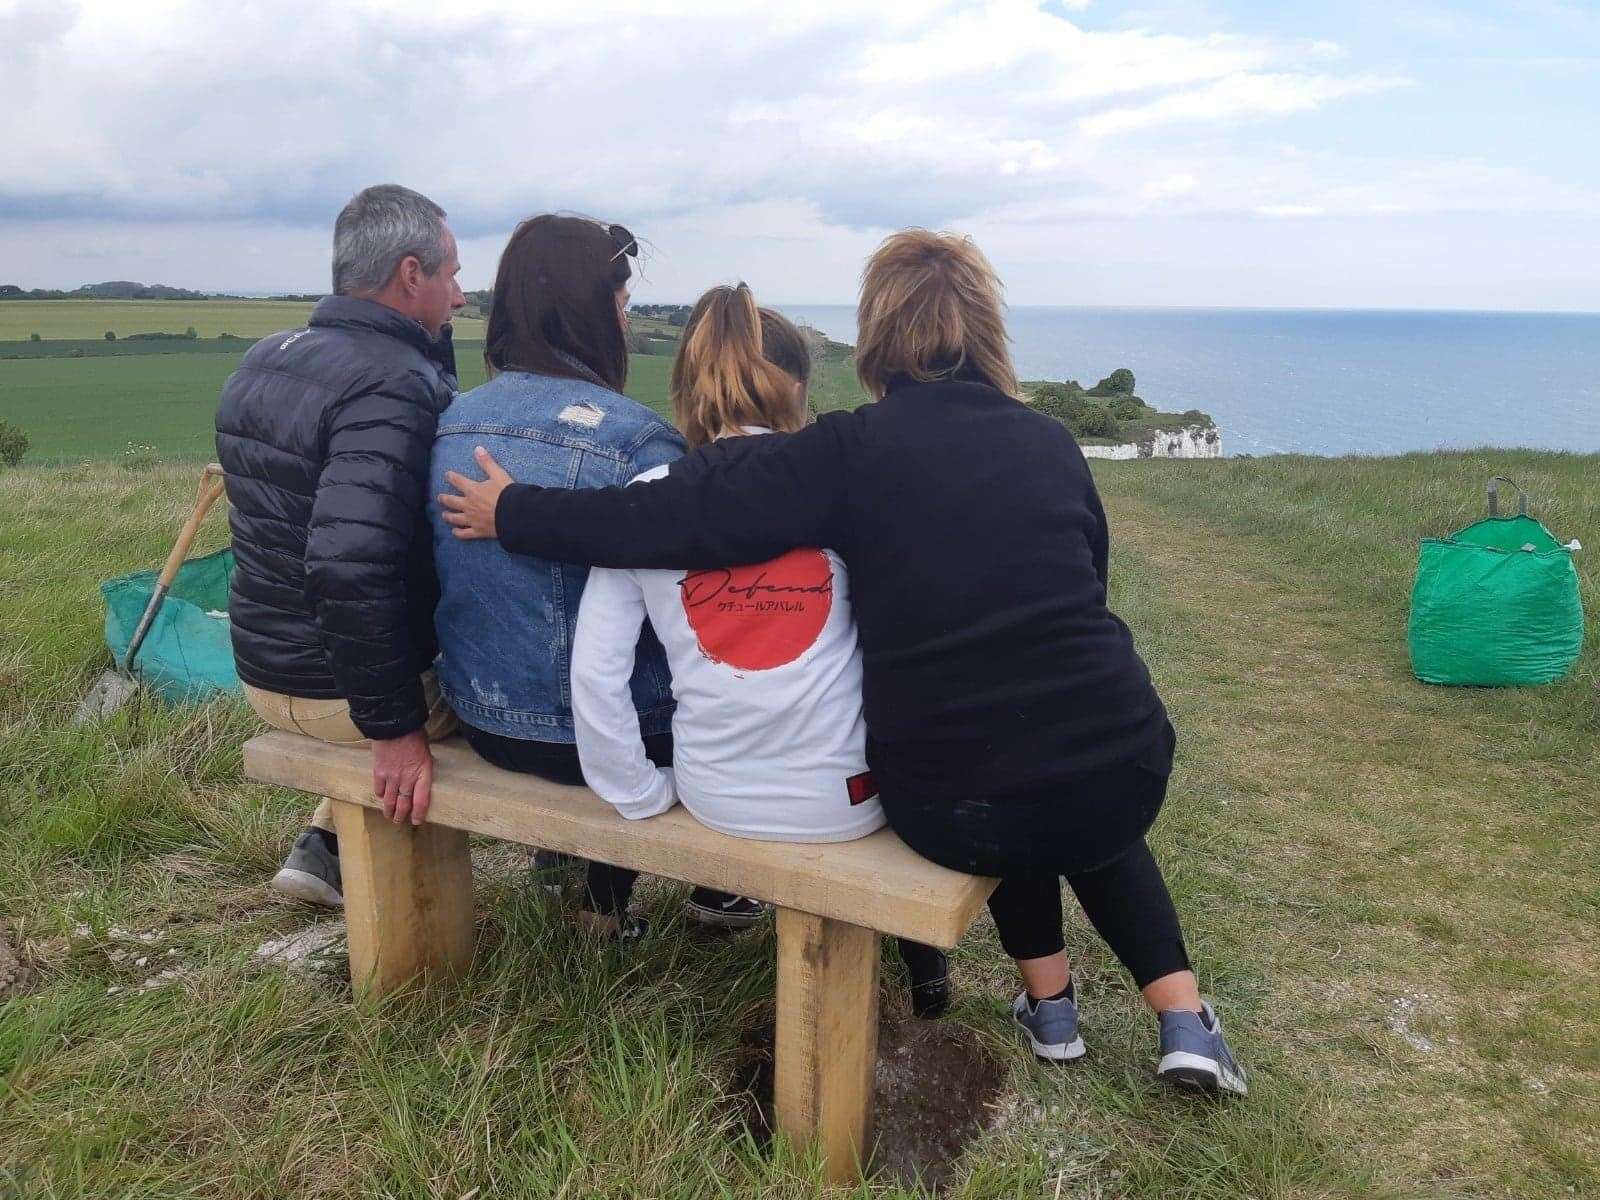 Daniel Squire's family say the bench is in the "perfect location"